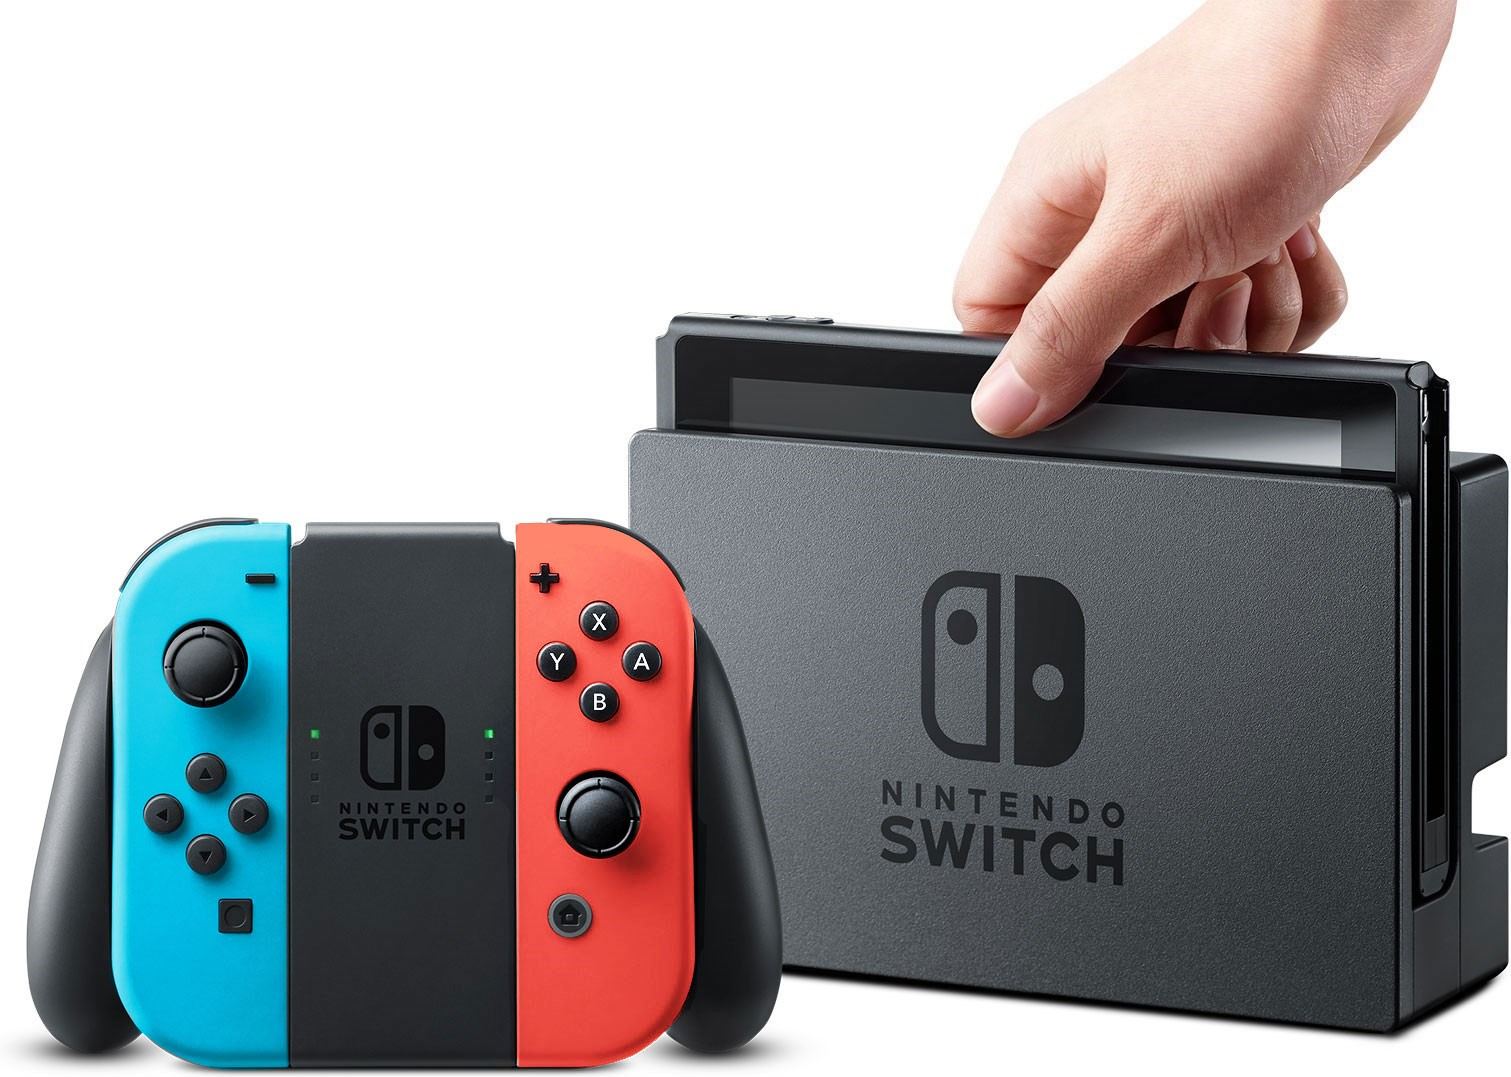 Nintendo Switch (Neon Blue / Neon Red) (Asia)